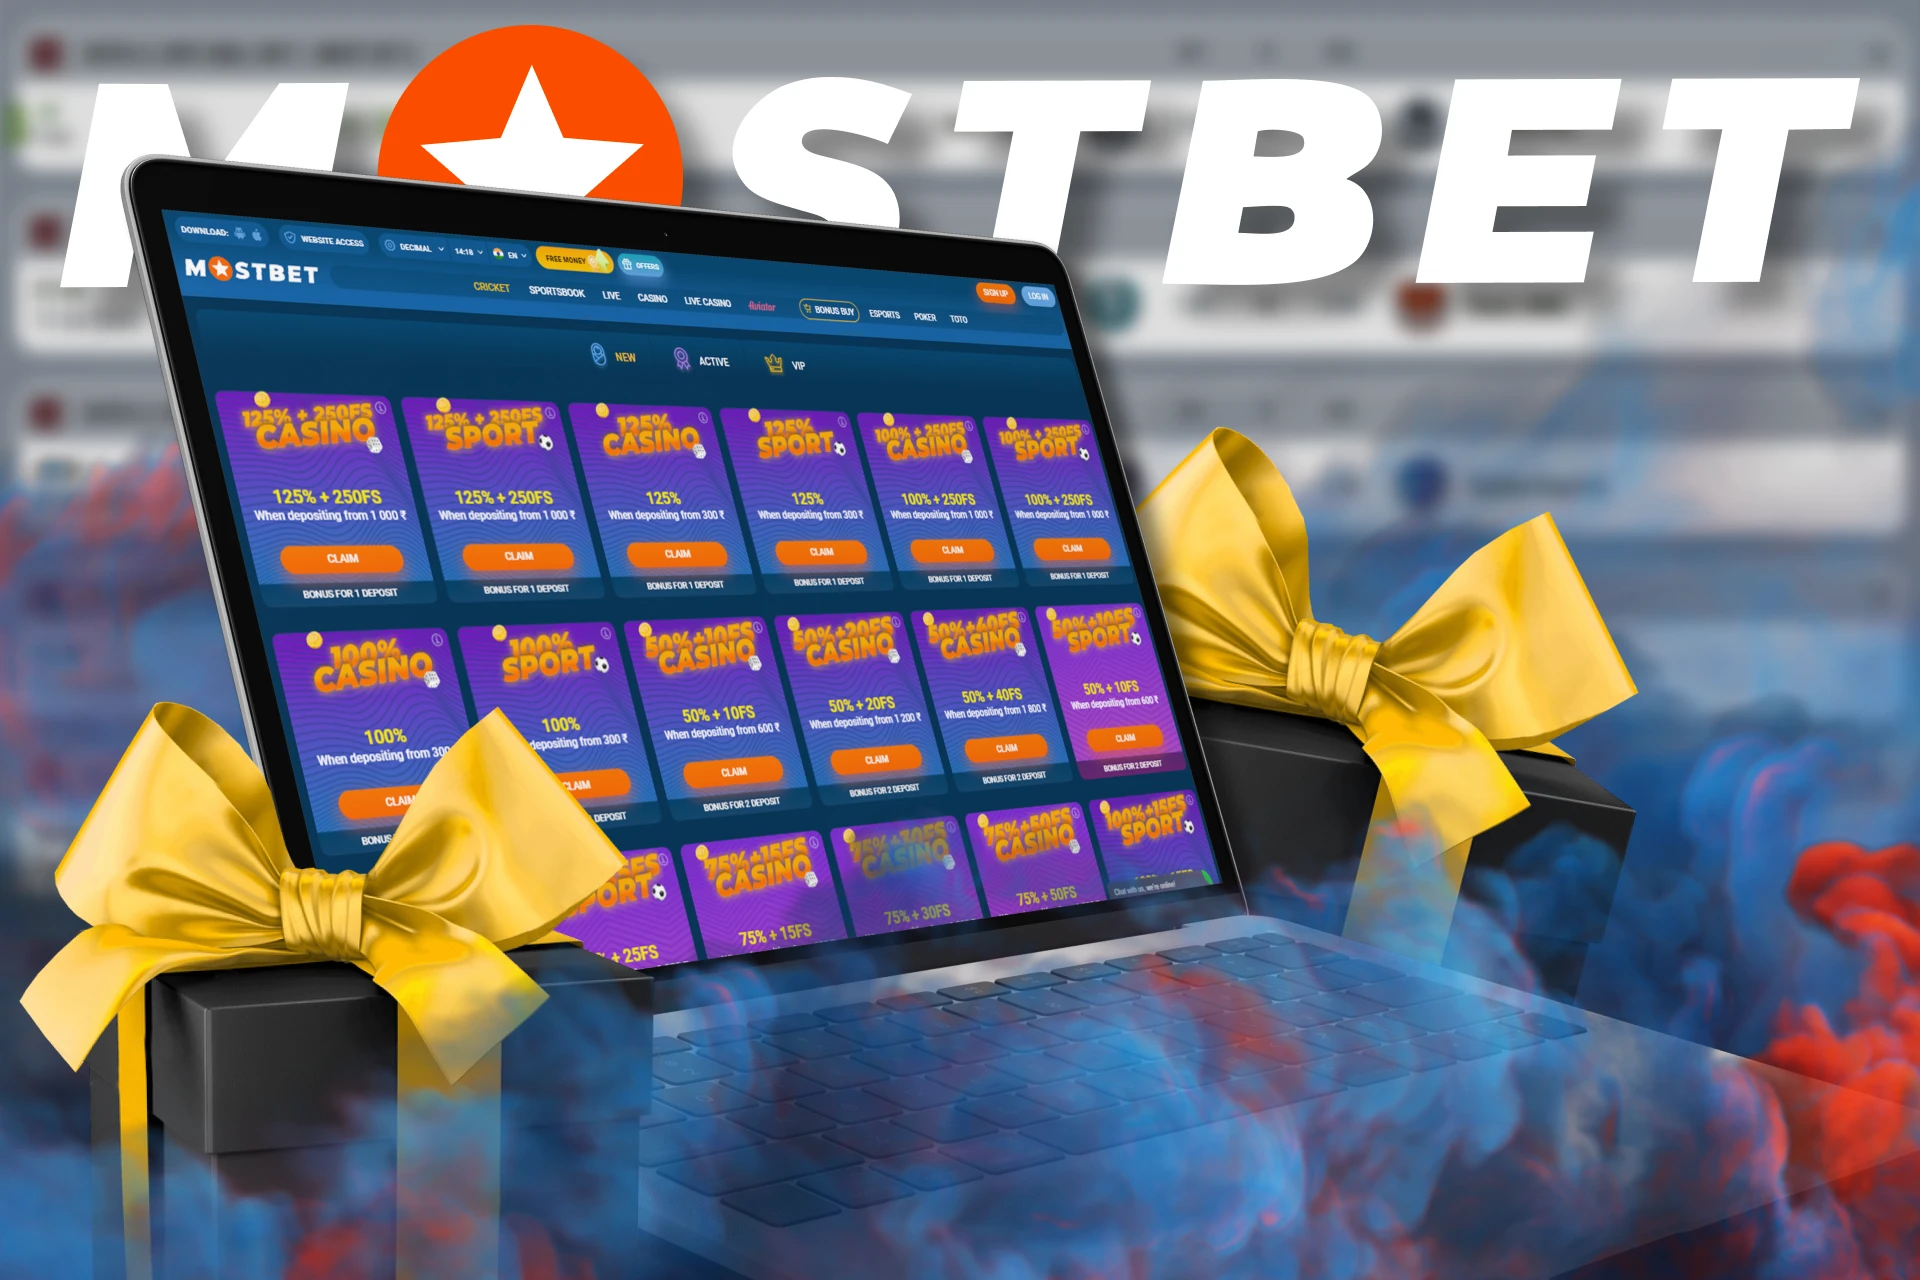 Make your first deposit to get a welcome bonus at Mostbet.